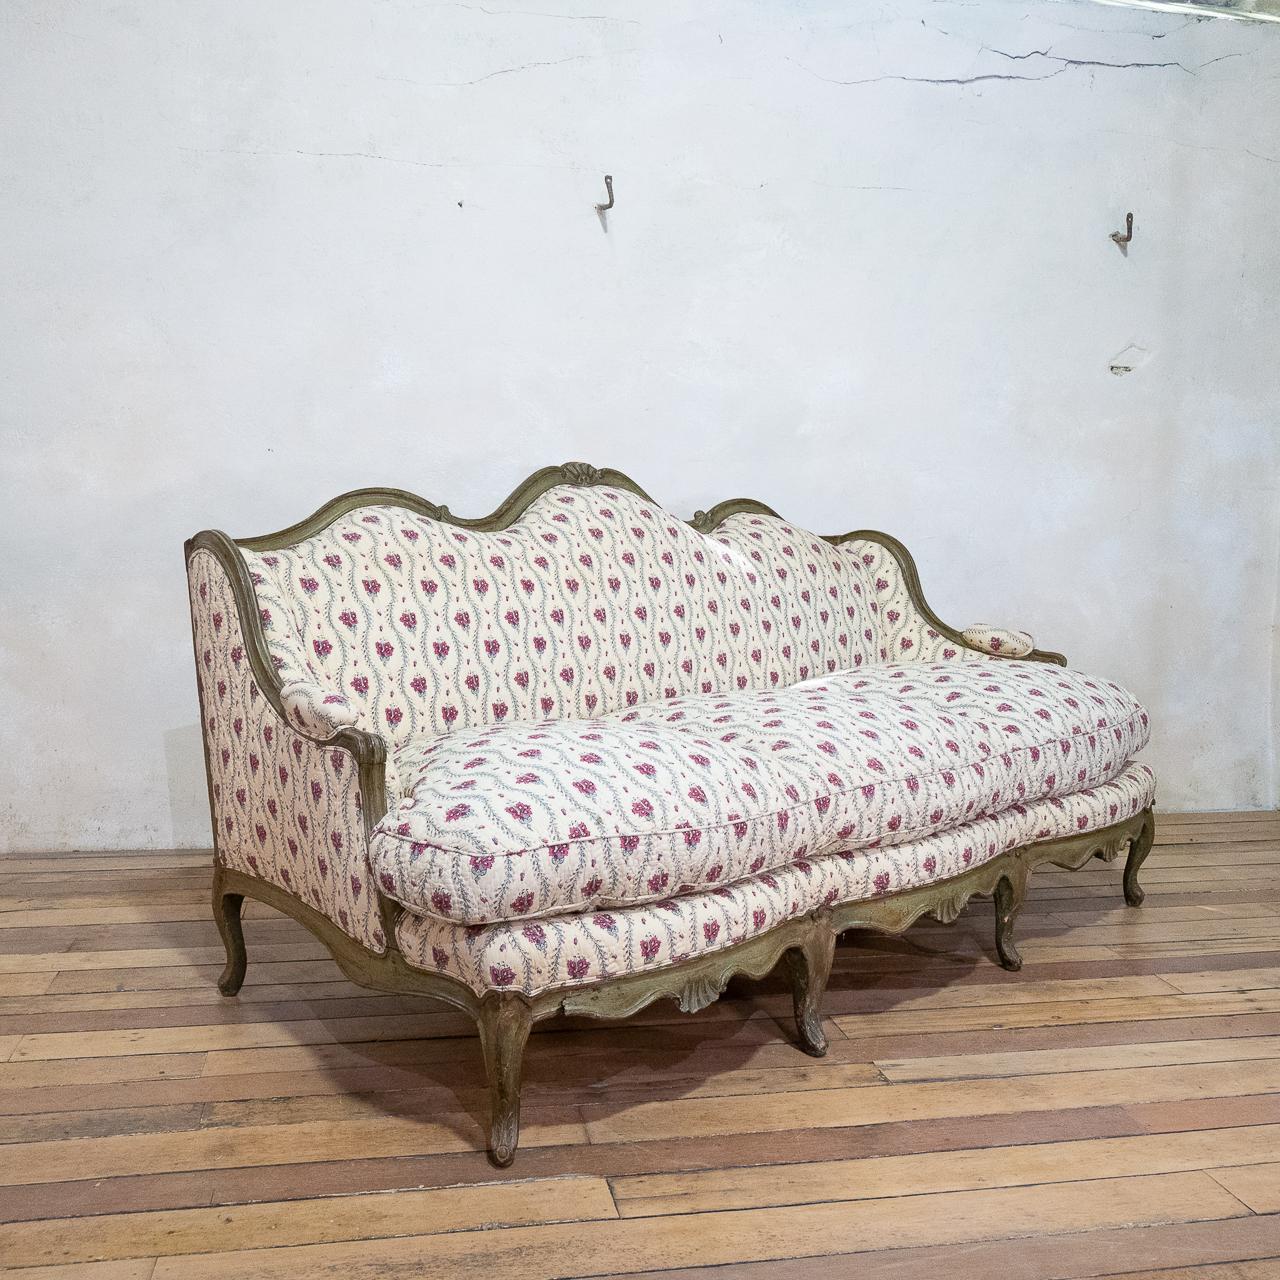 A Louis XV period Canapé à Oreilles serpentine-shaped sofa. Featuring carved detailing, decorated with floral motifs and acanthus, with original Verde paint. The seat rails display central scallop shell carved motifs raised on cabriole legs headed